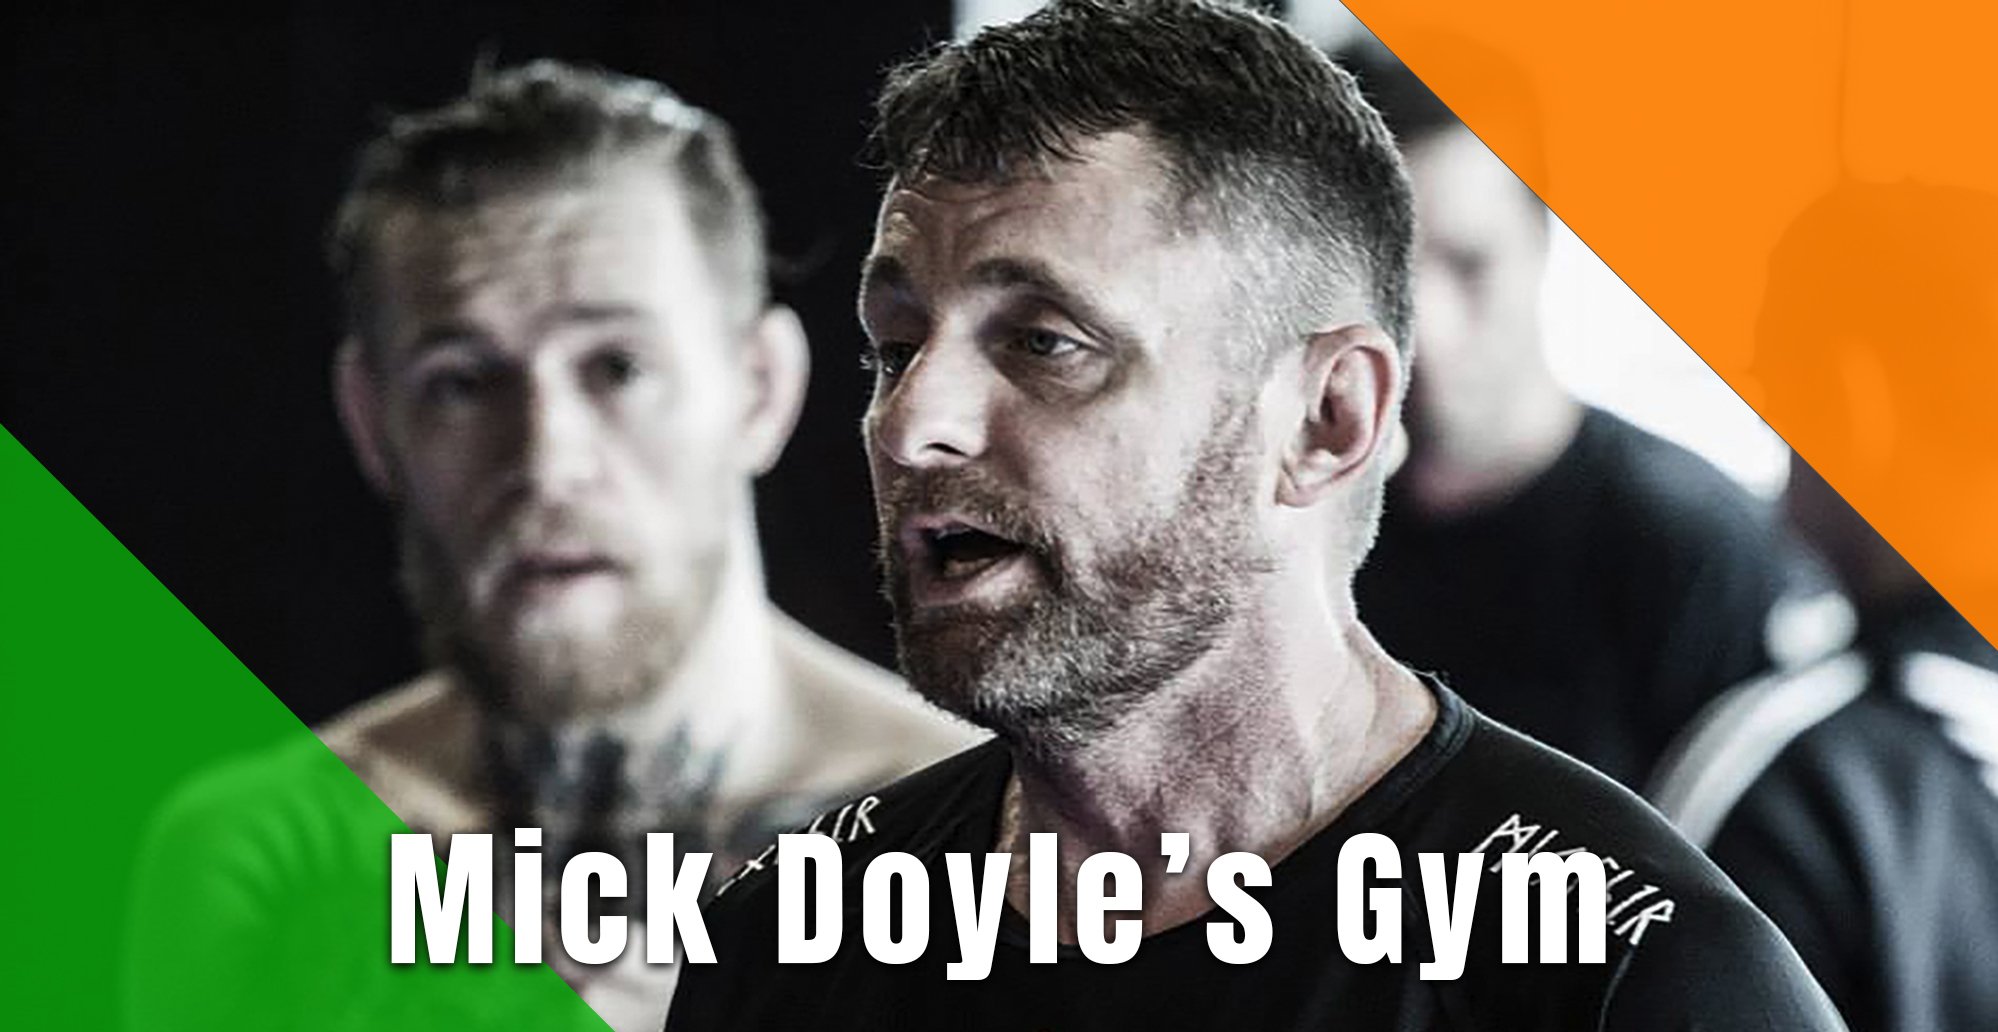 Mick Doyle and Conor McGregor